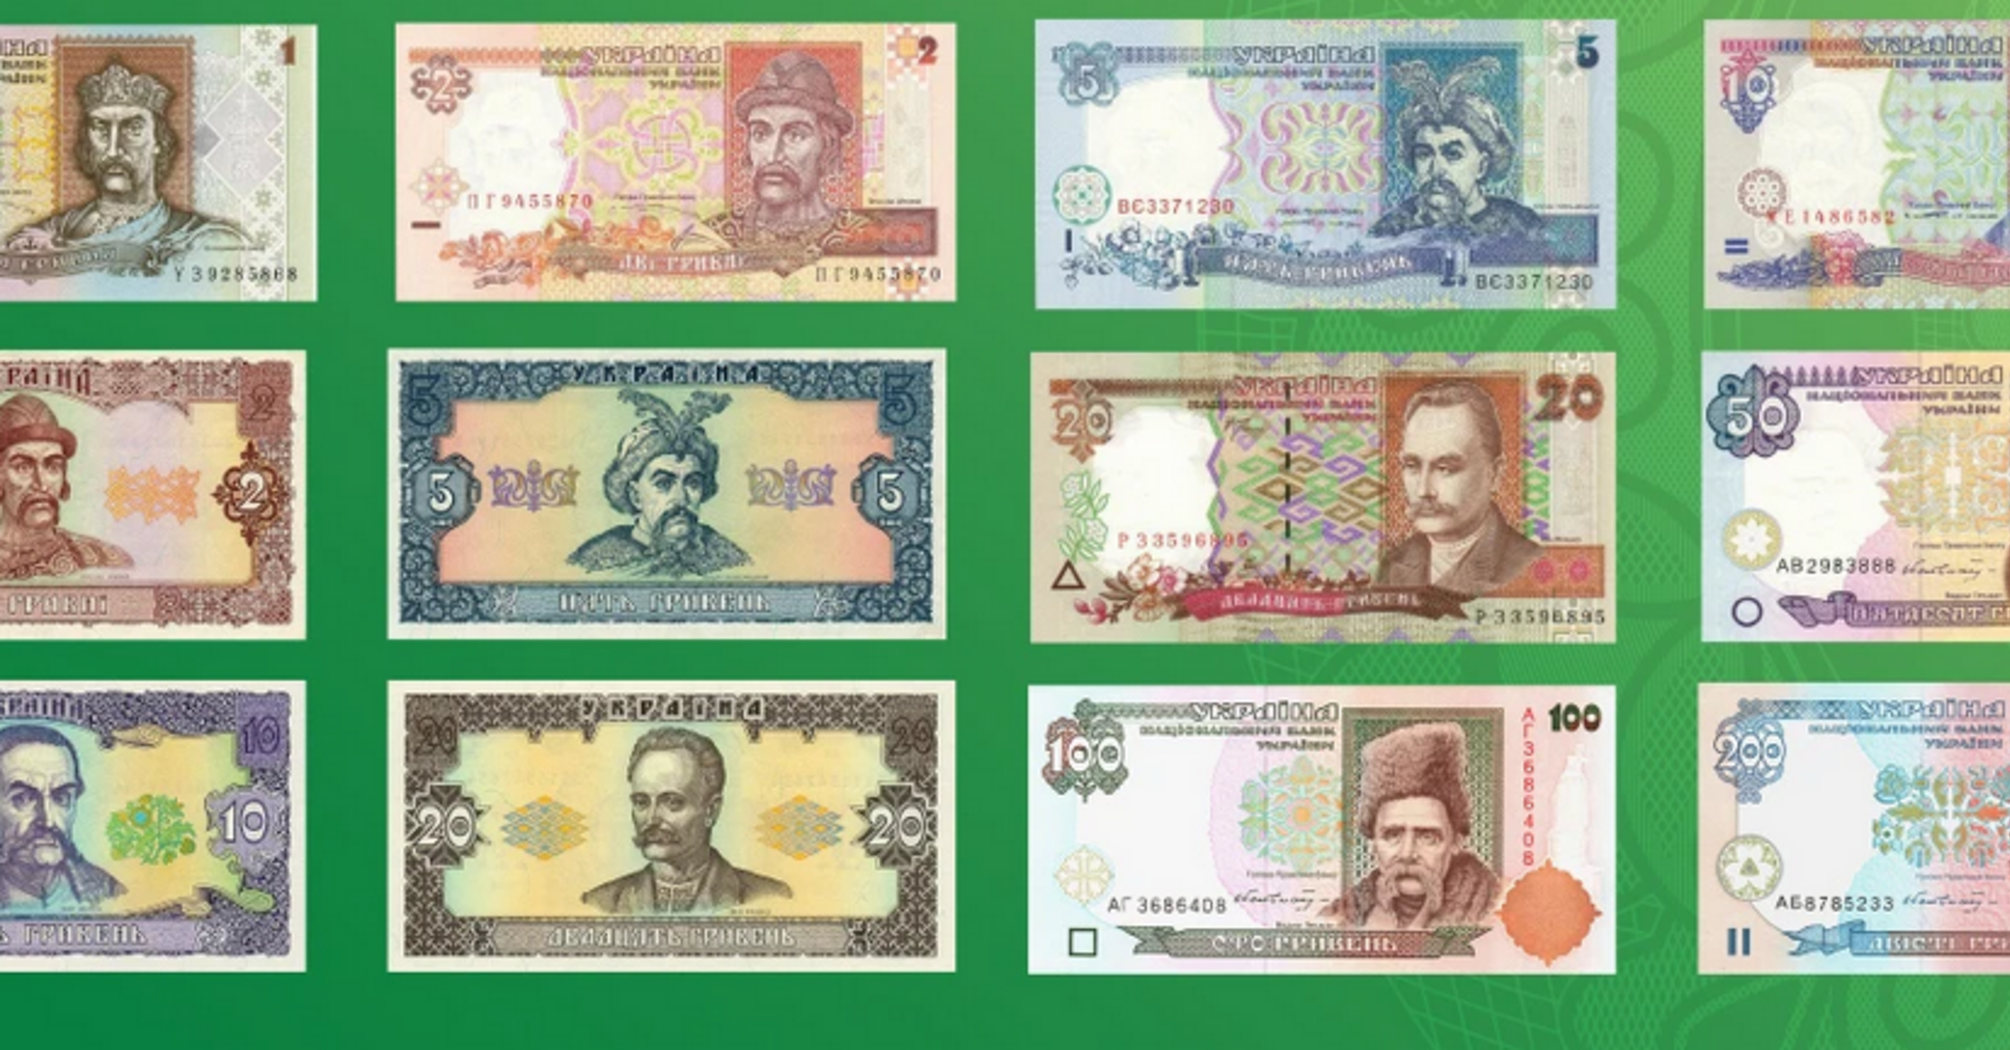 The NBU is withdrawing old hryvnia notes from circulation